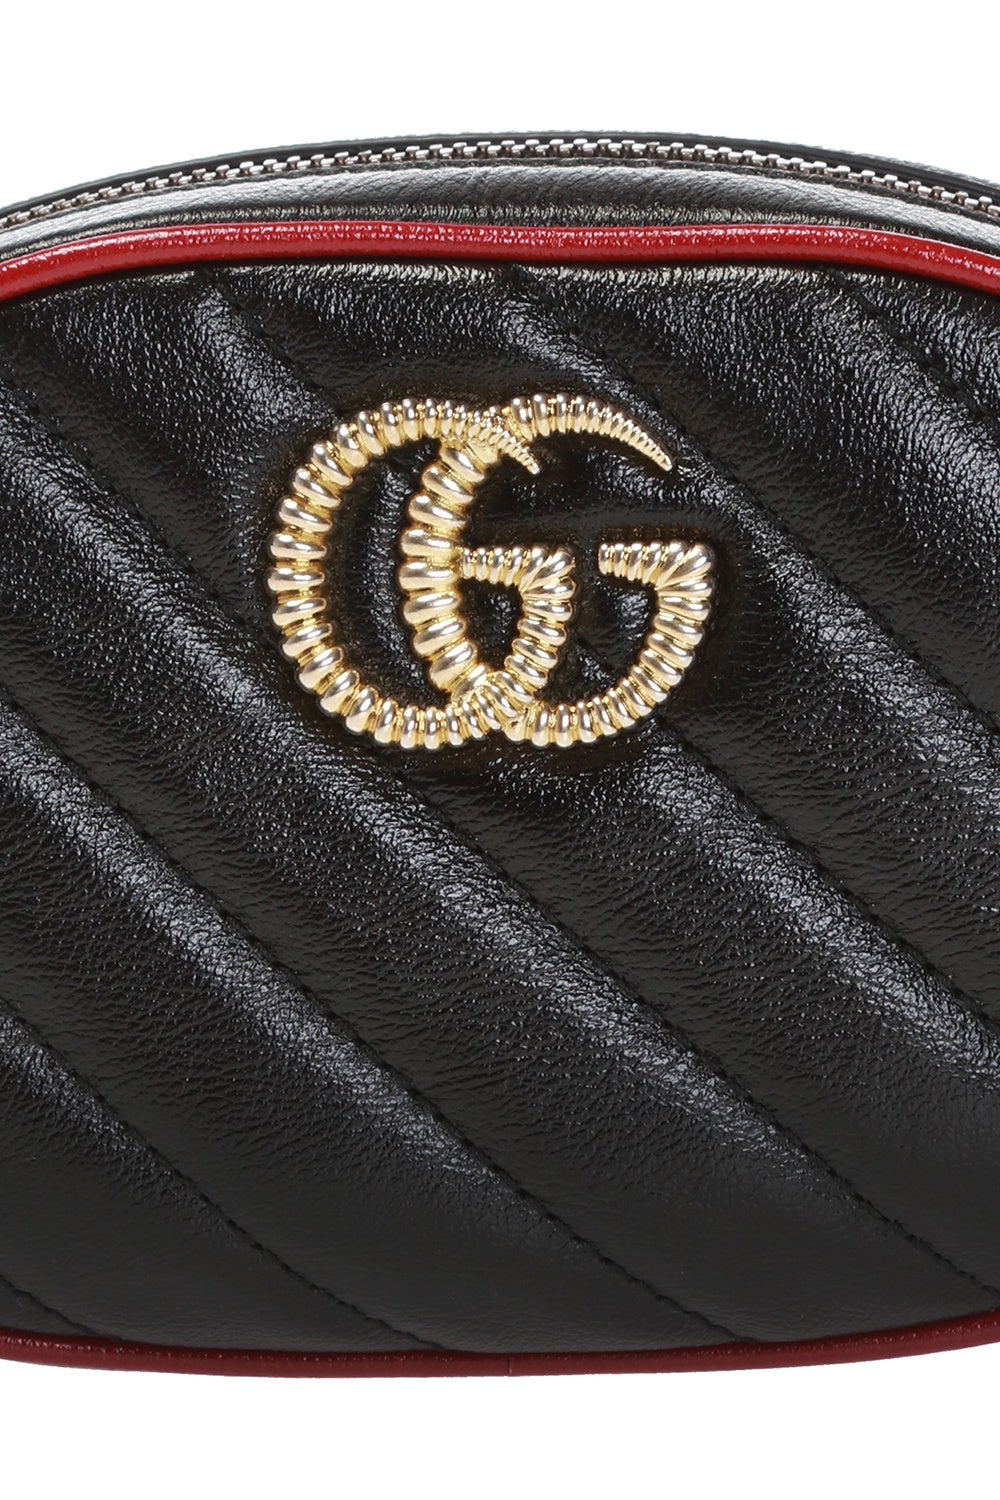 GG Marmont small shoulder bag with wool trim in black leather